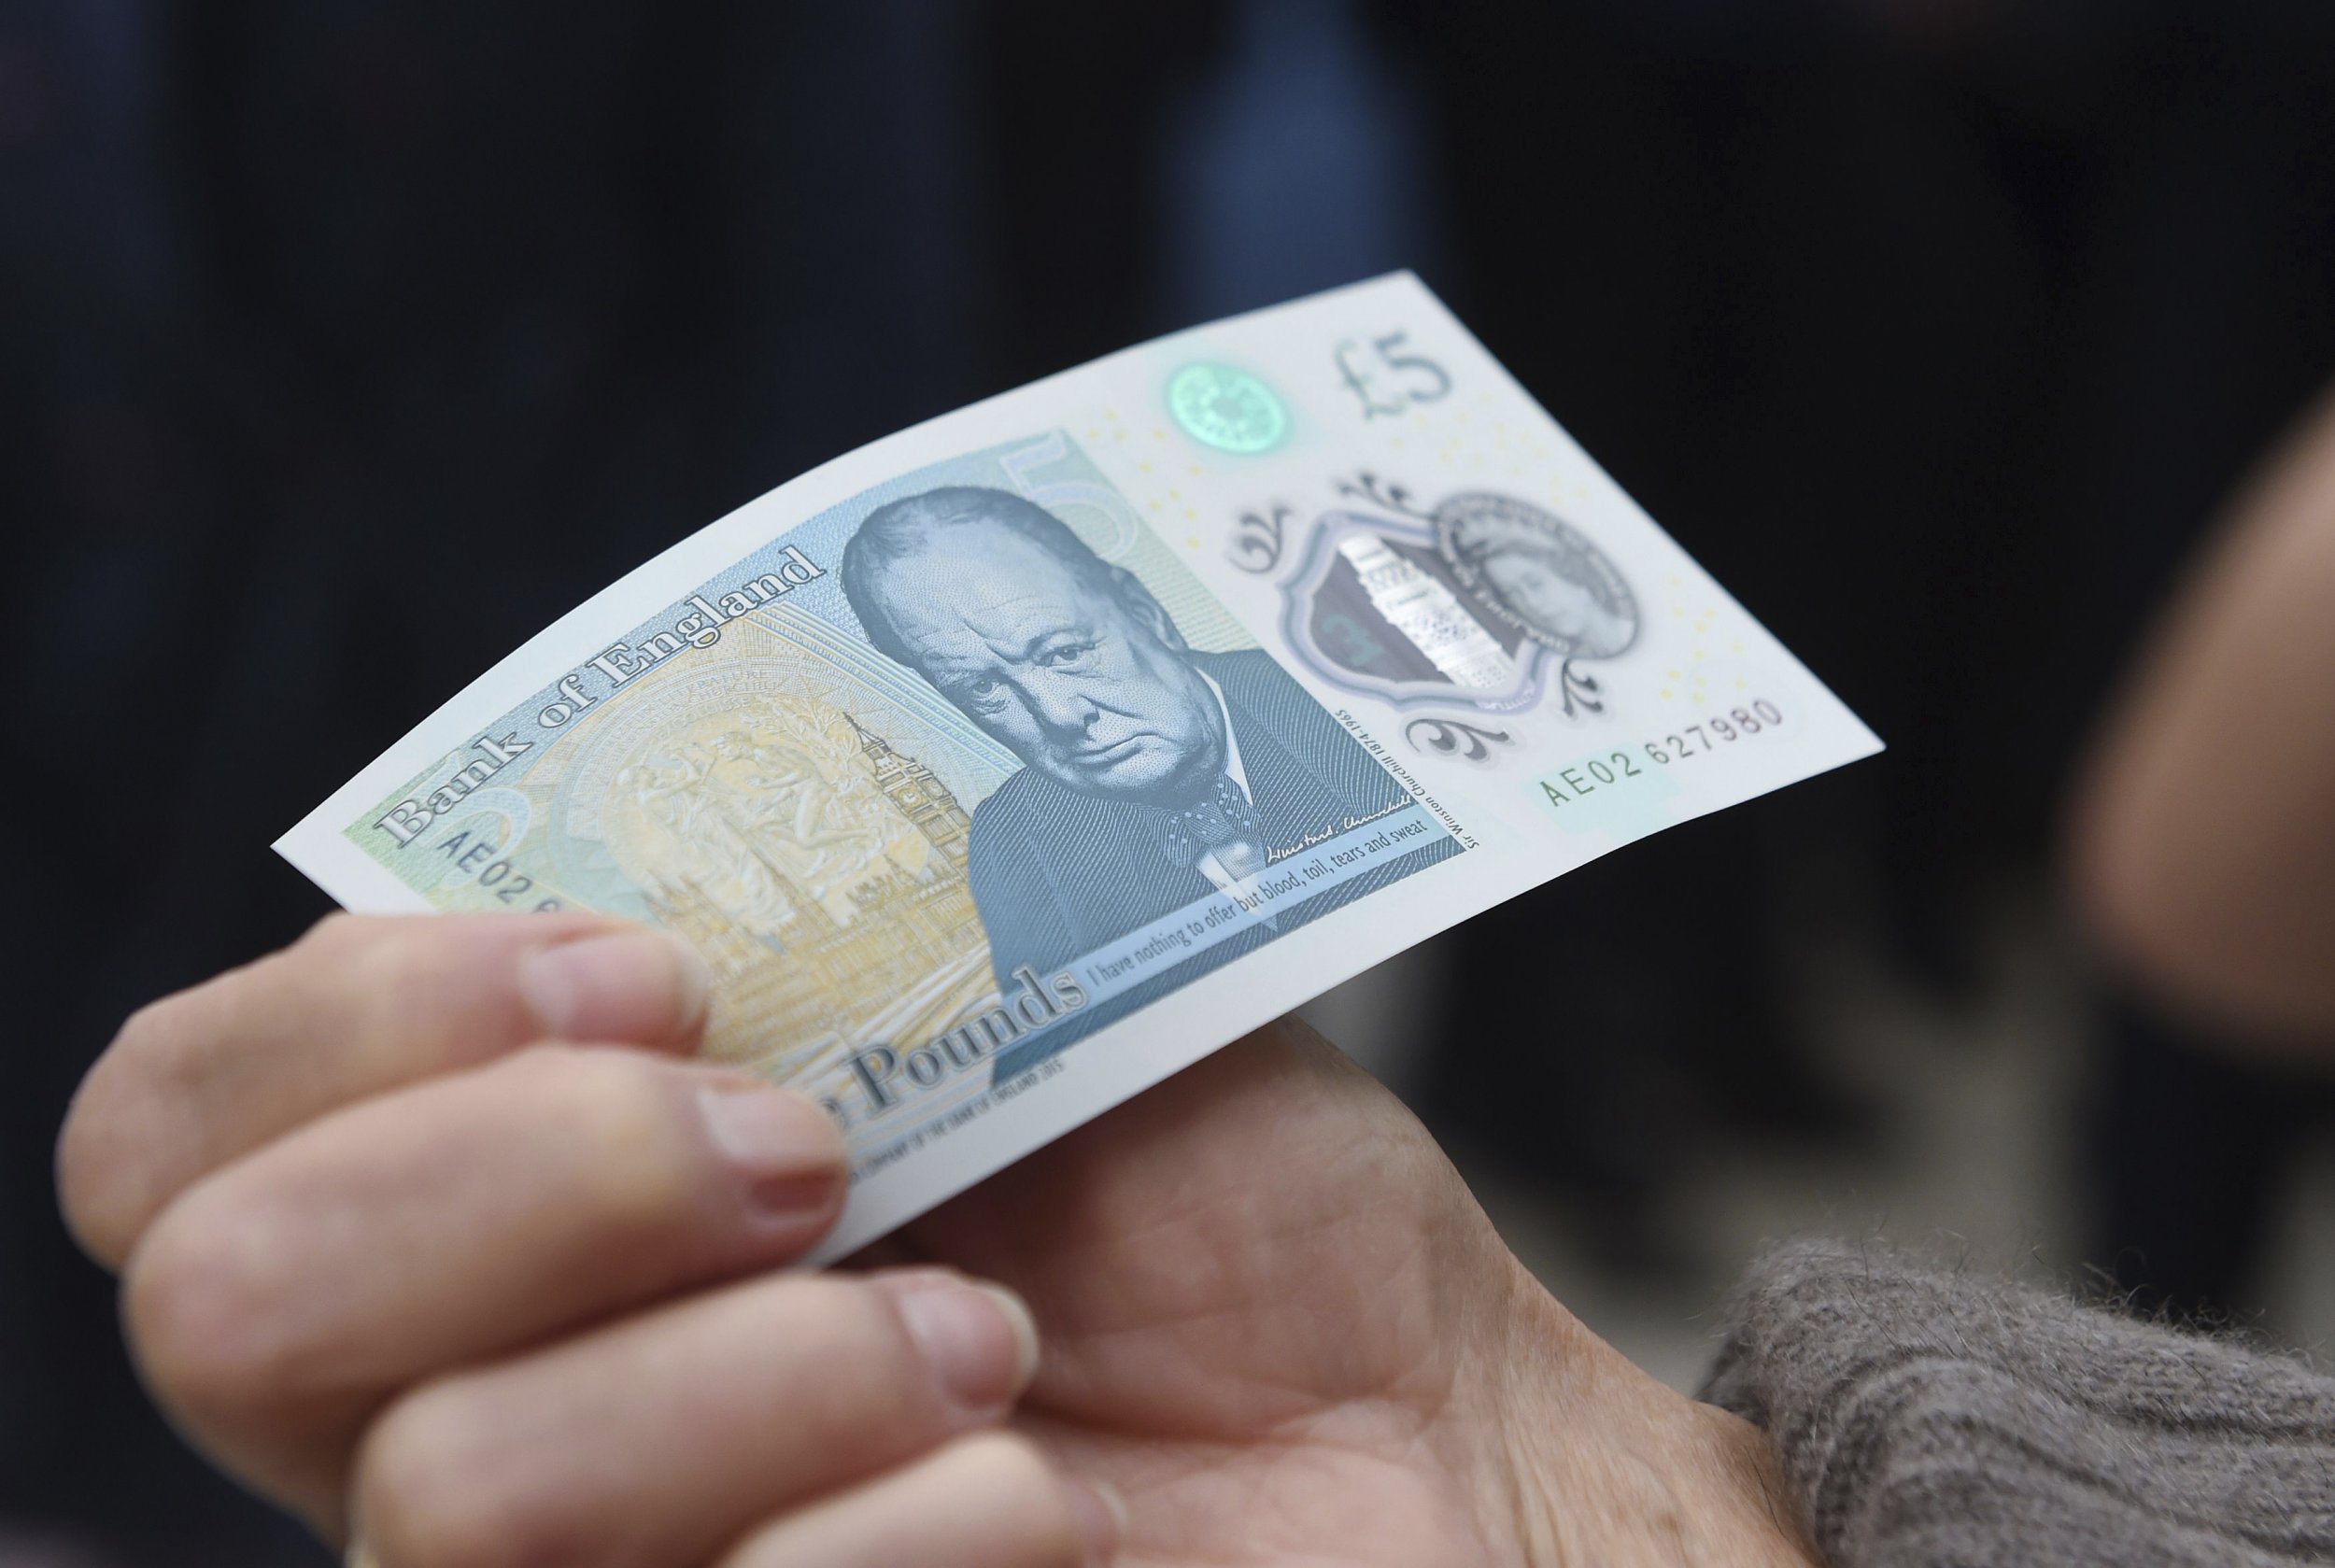 £5 note featuring Sir Winston Churchill